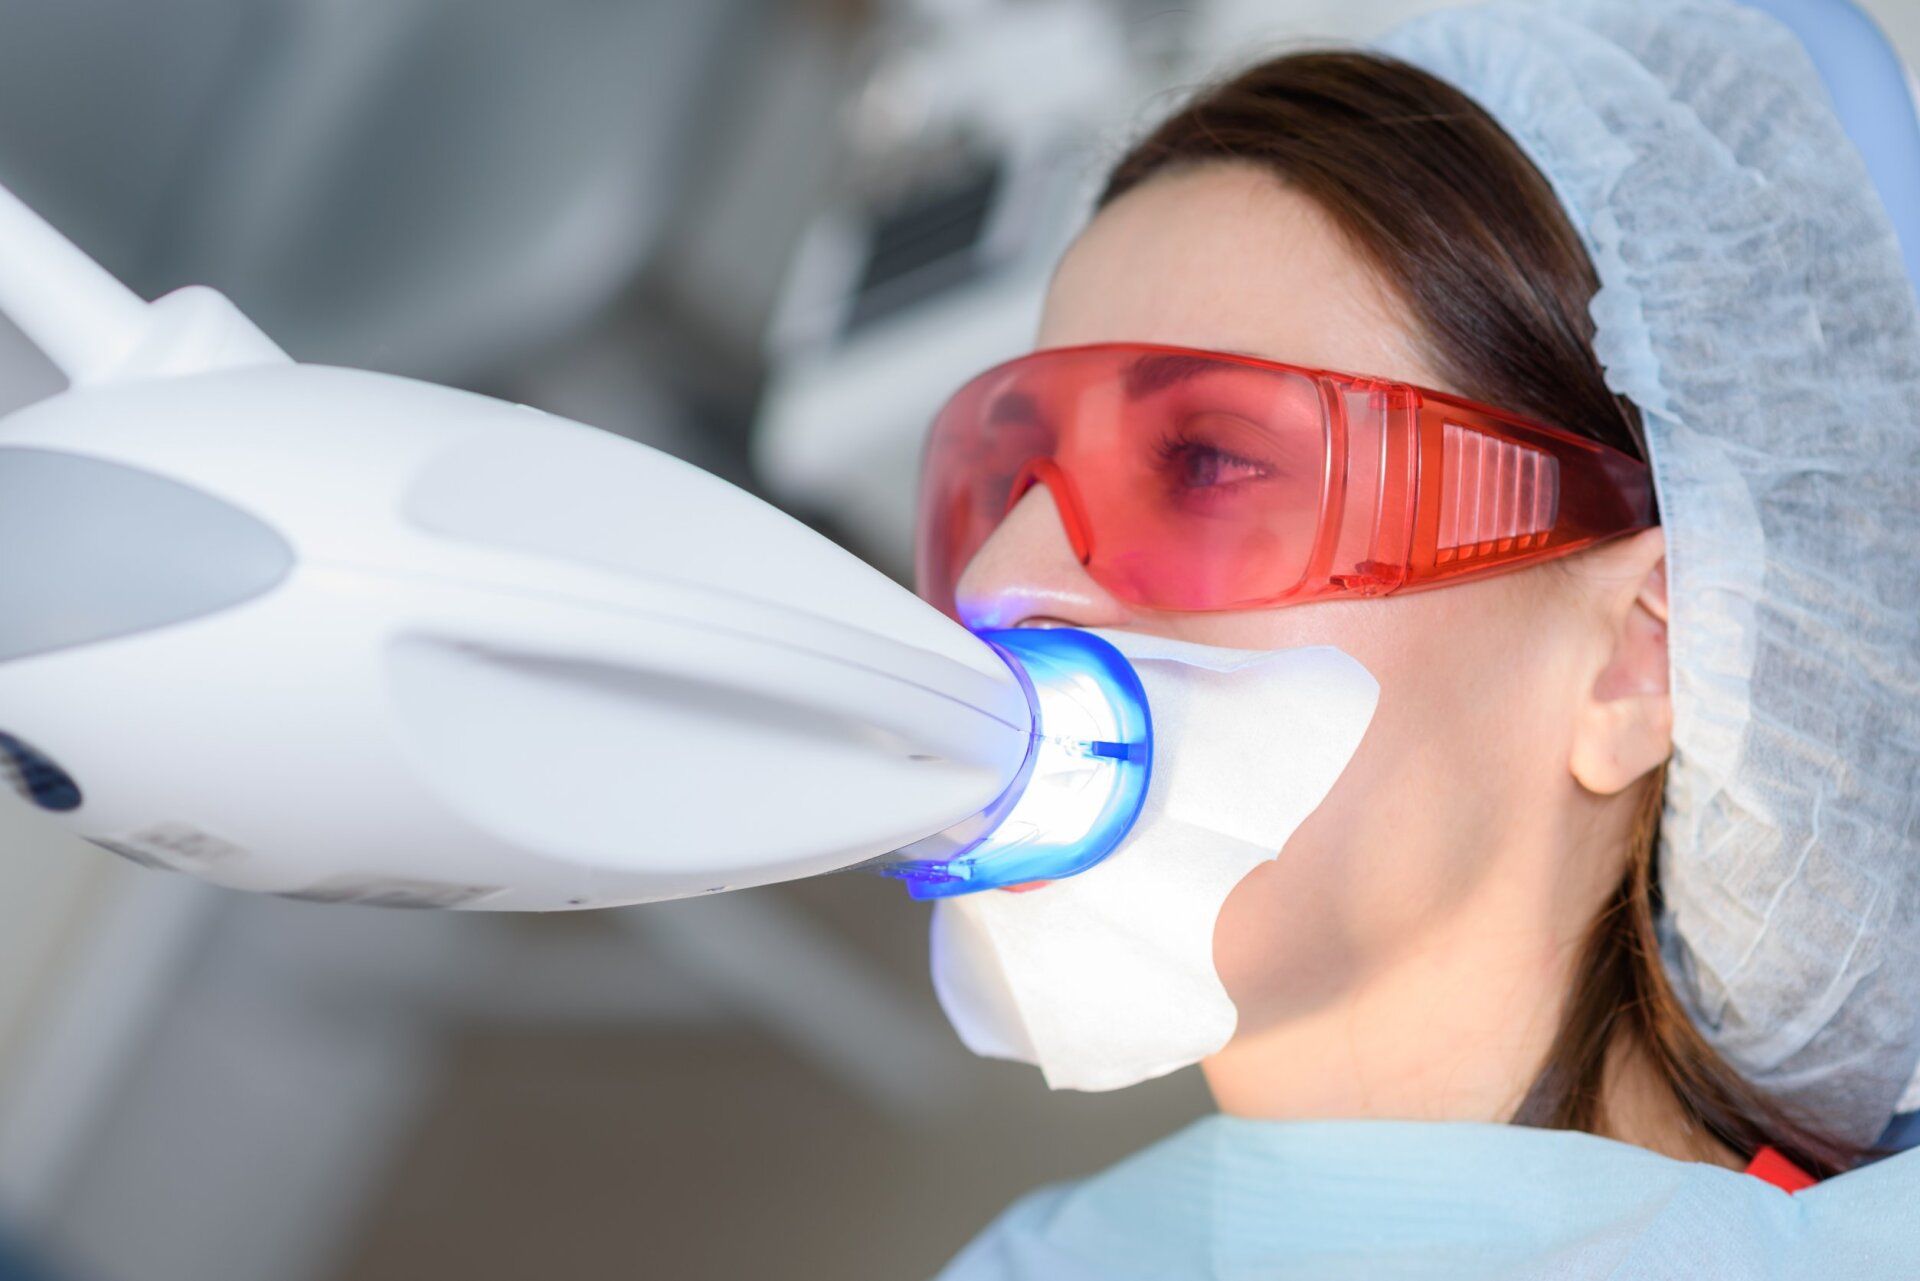 The girl undergoes the procedure of teeth whitening with the help of ultraviolet lamp